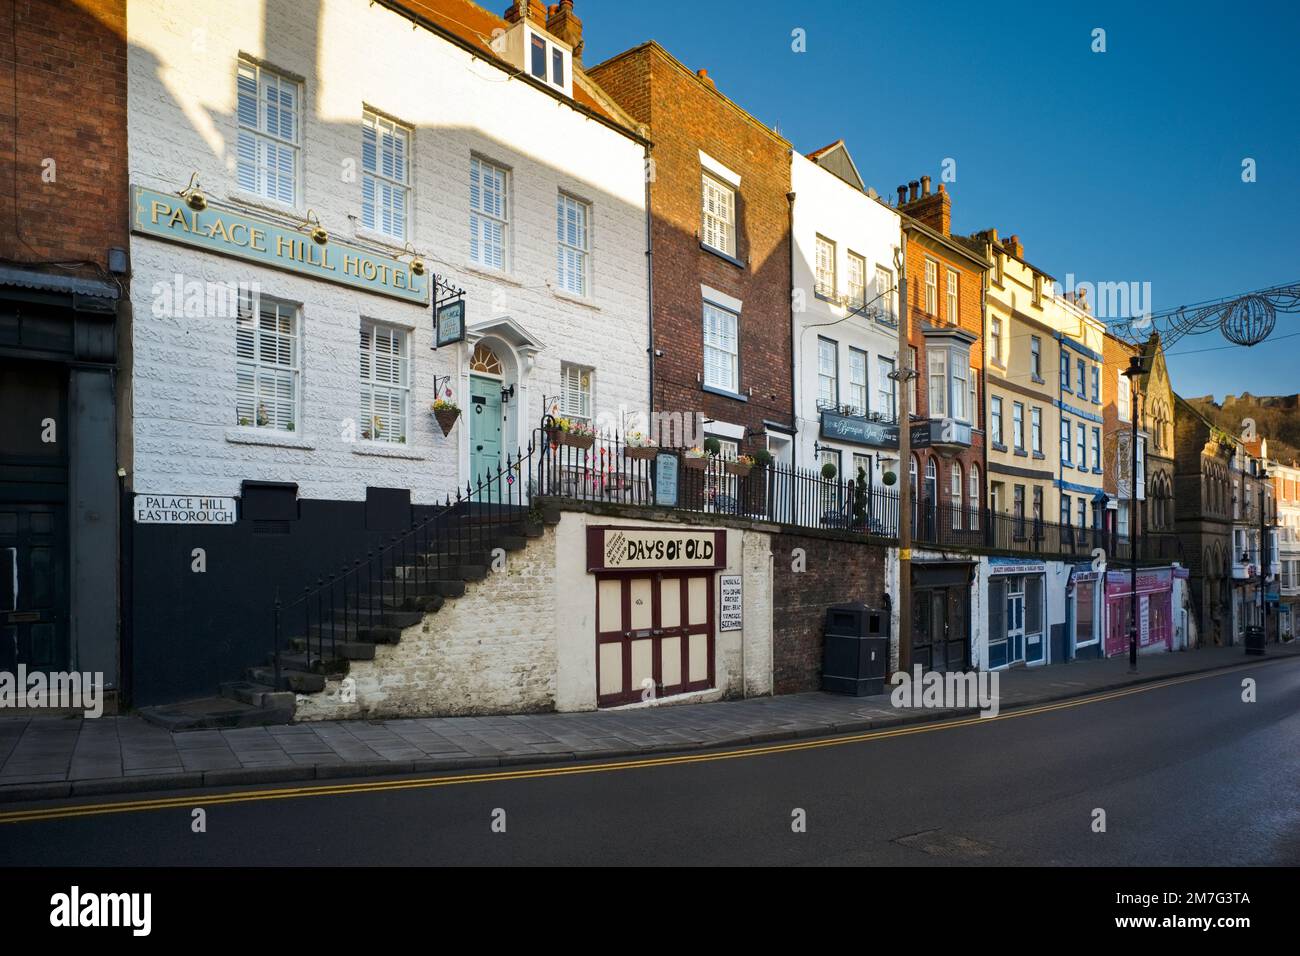 Palace Hill and Eastborough in the older part of Scarborough Stock Photo